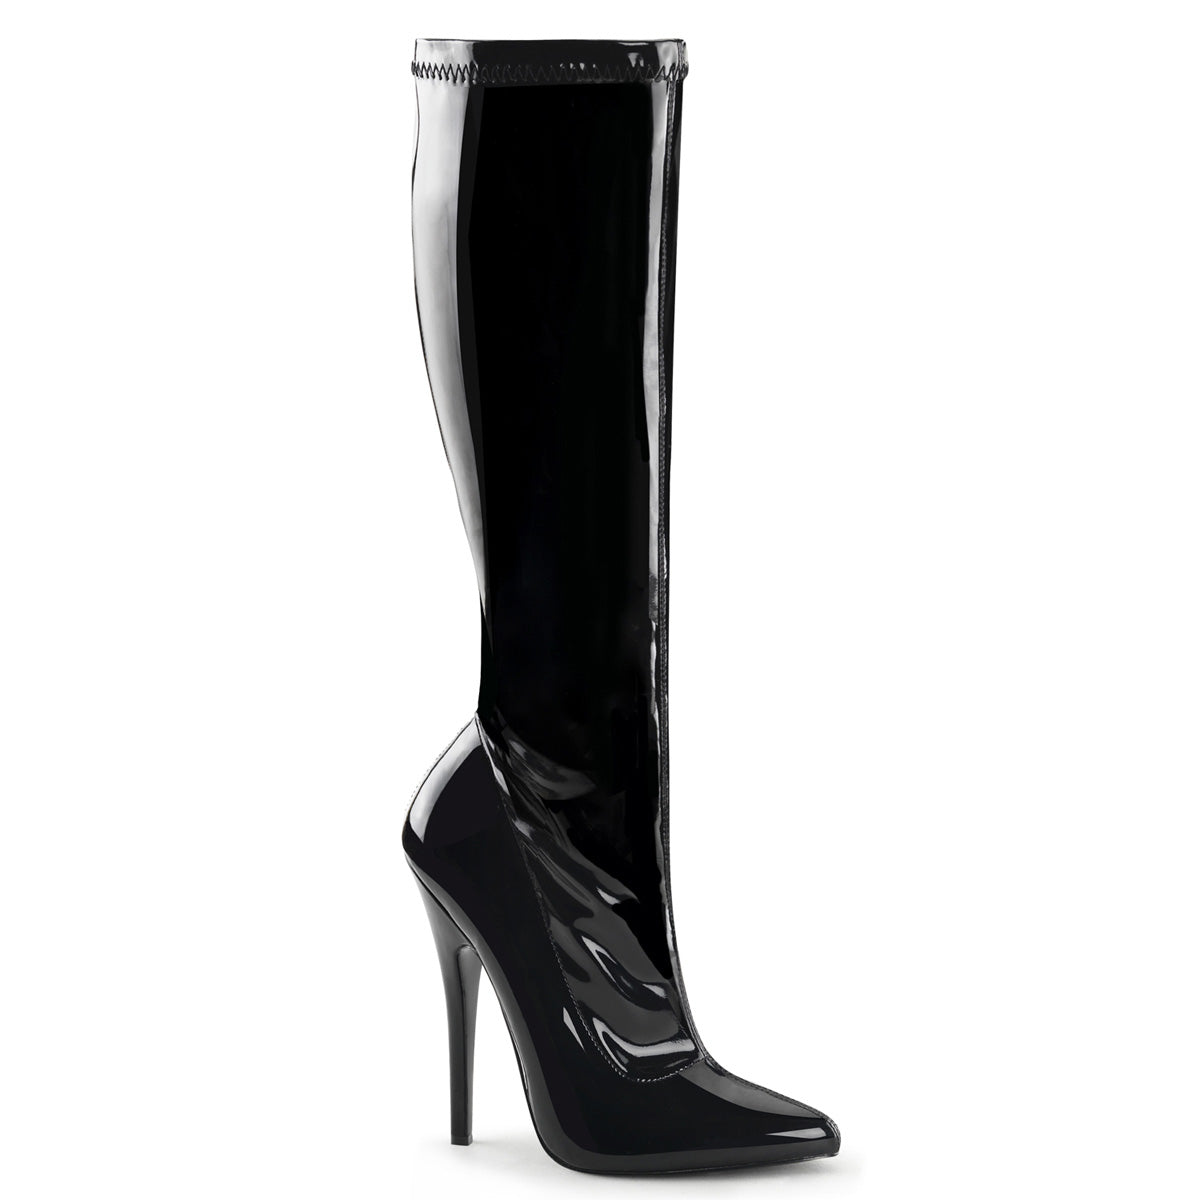 Pleaser Domina-2000 Knee High Stiletto Boot – Leather and Heels